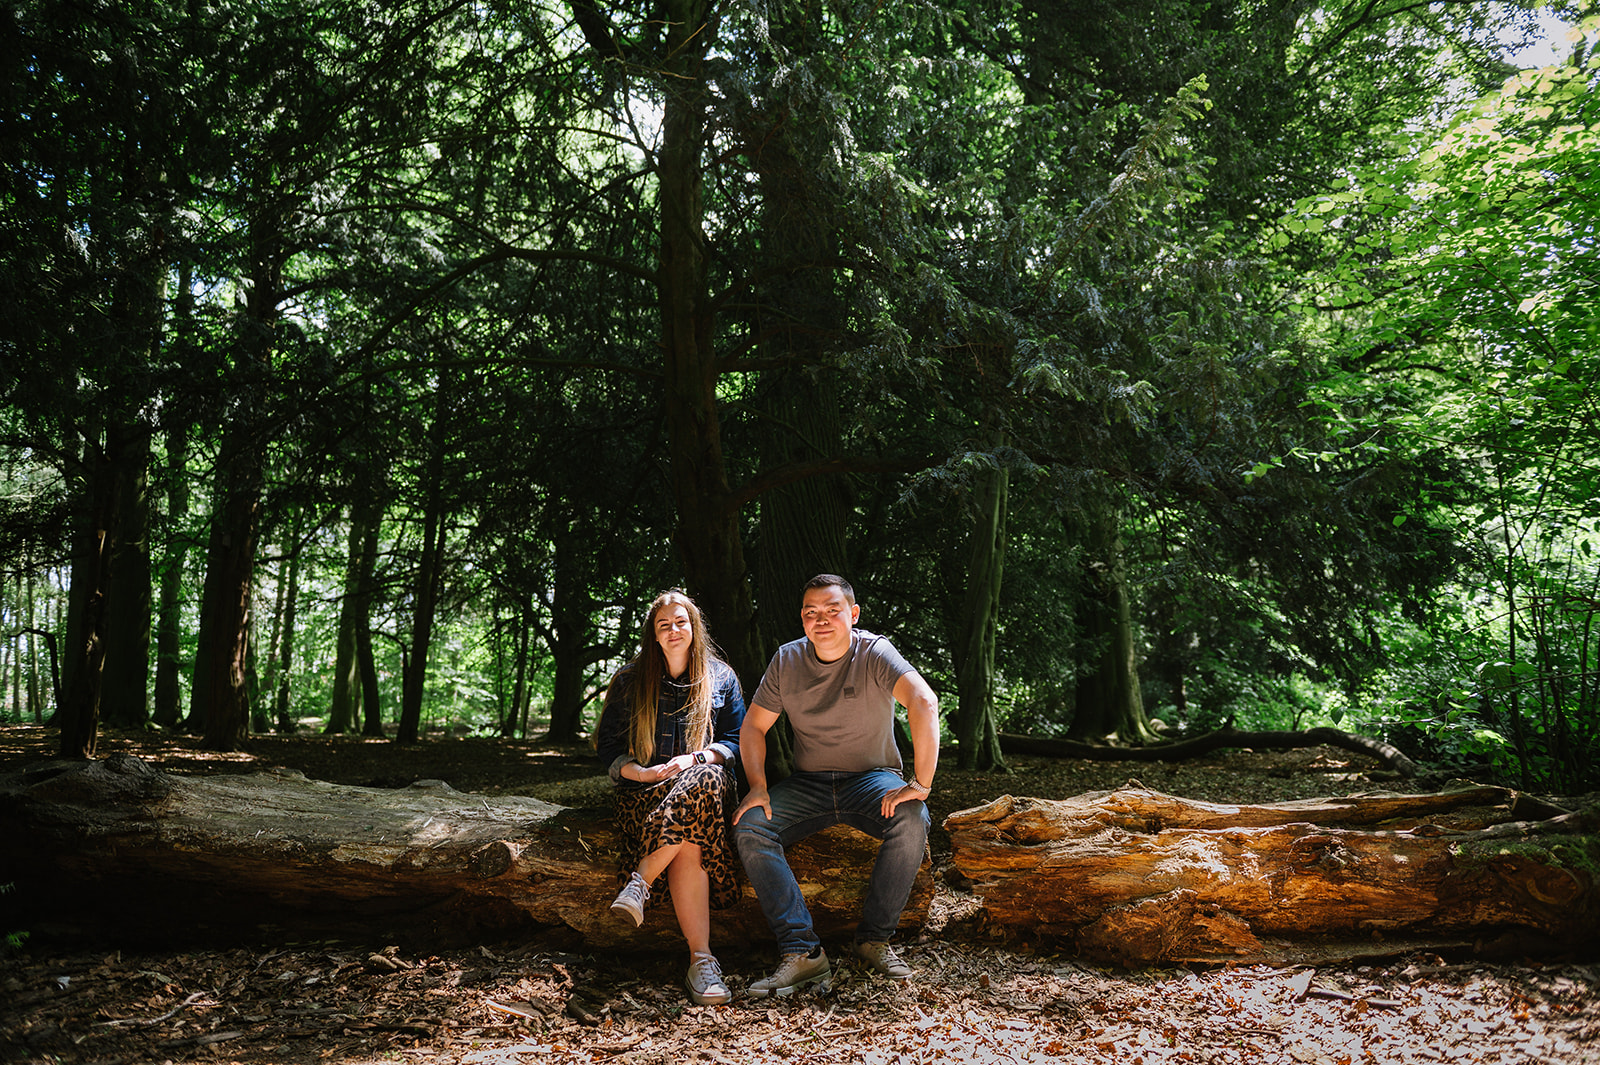 a walk in the woods in Telford for their engagement photos